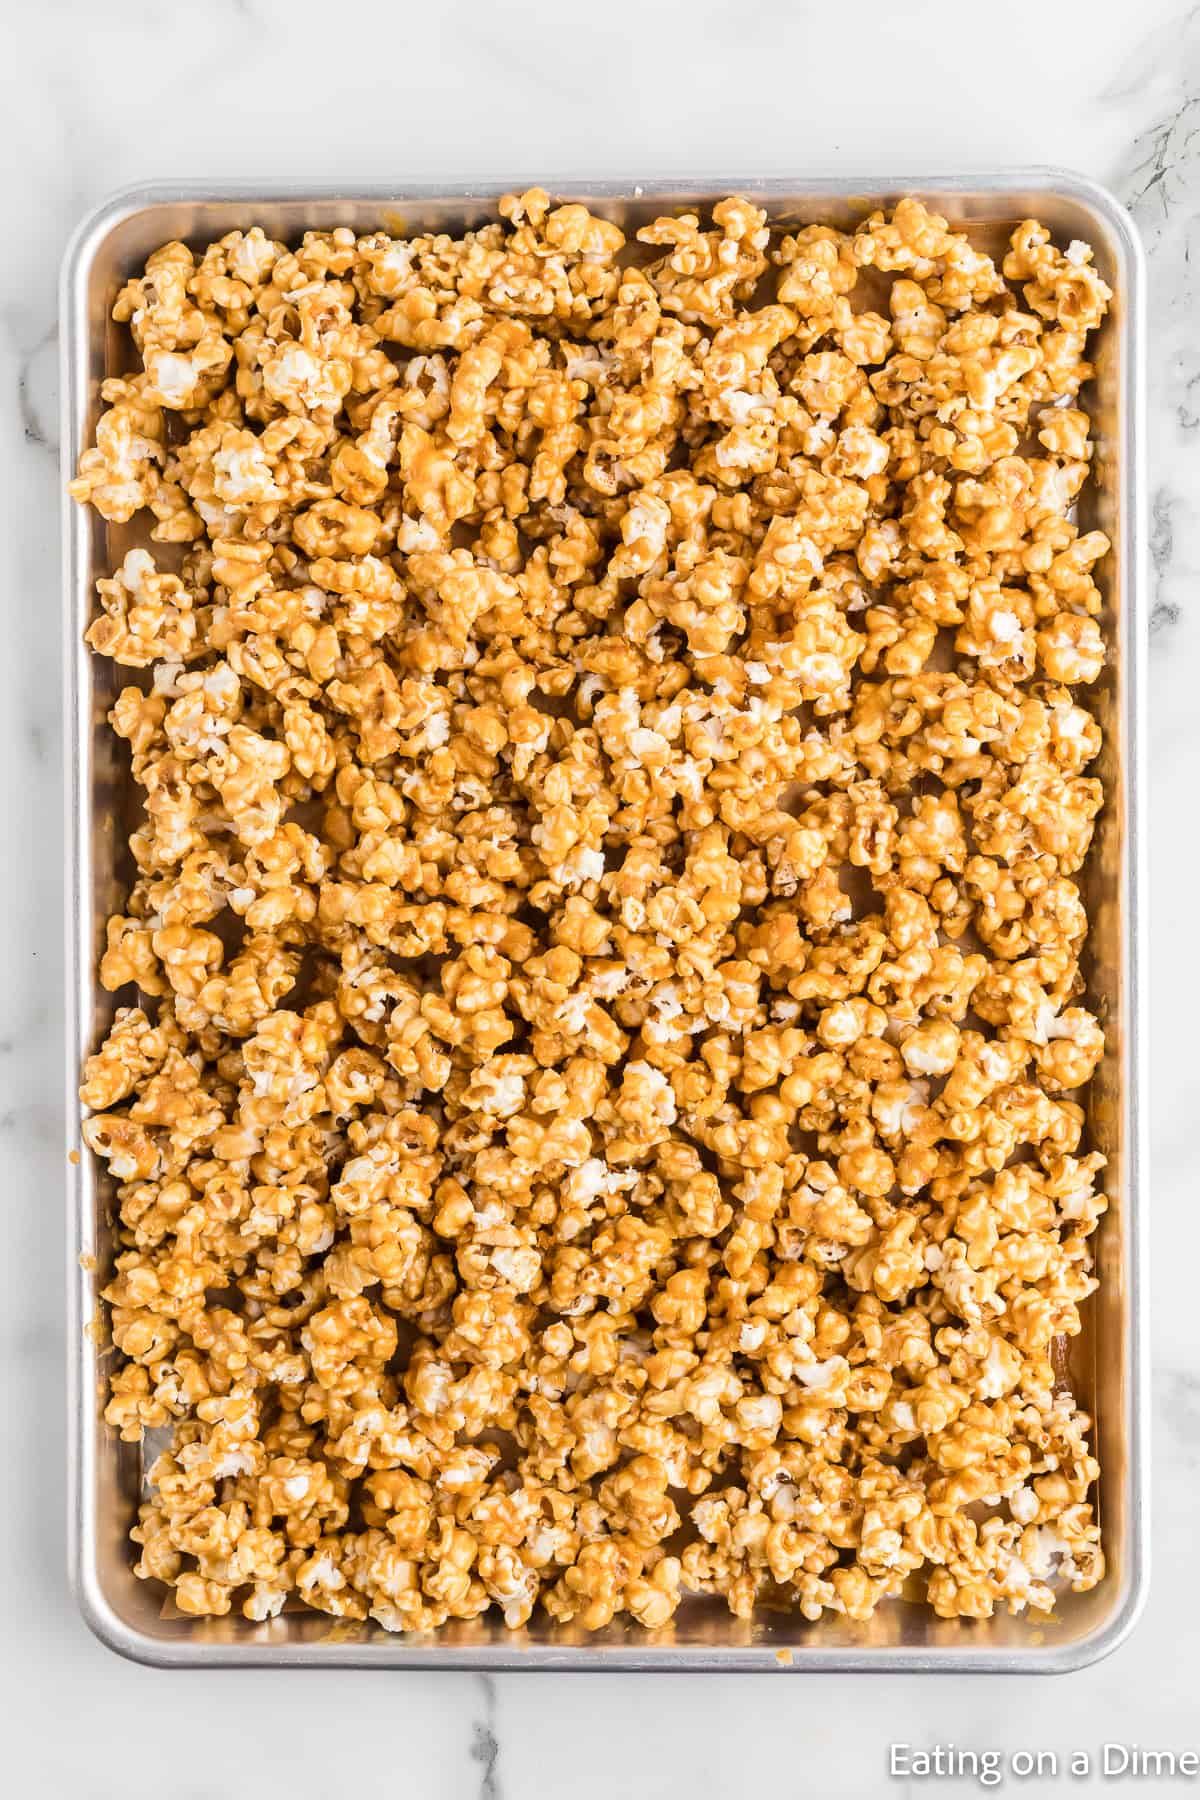 Caramel popcorn spread out on the baking sheet